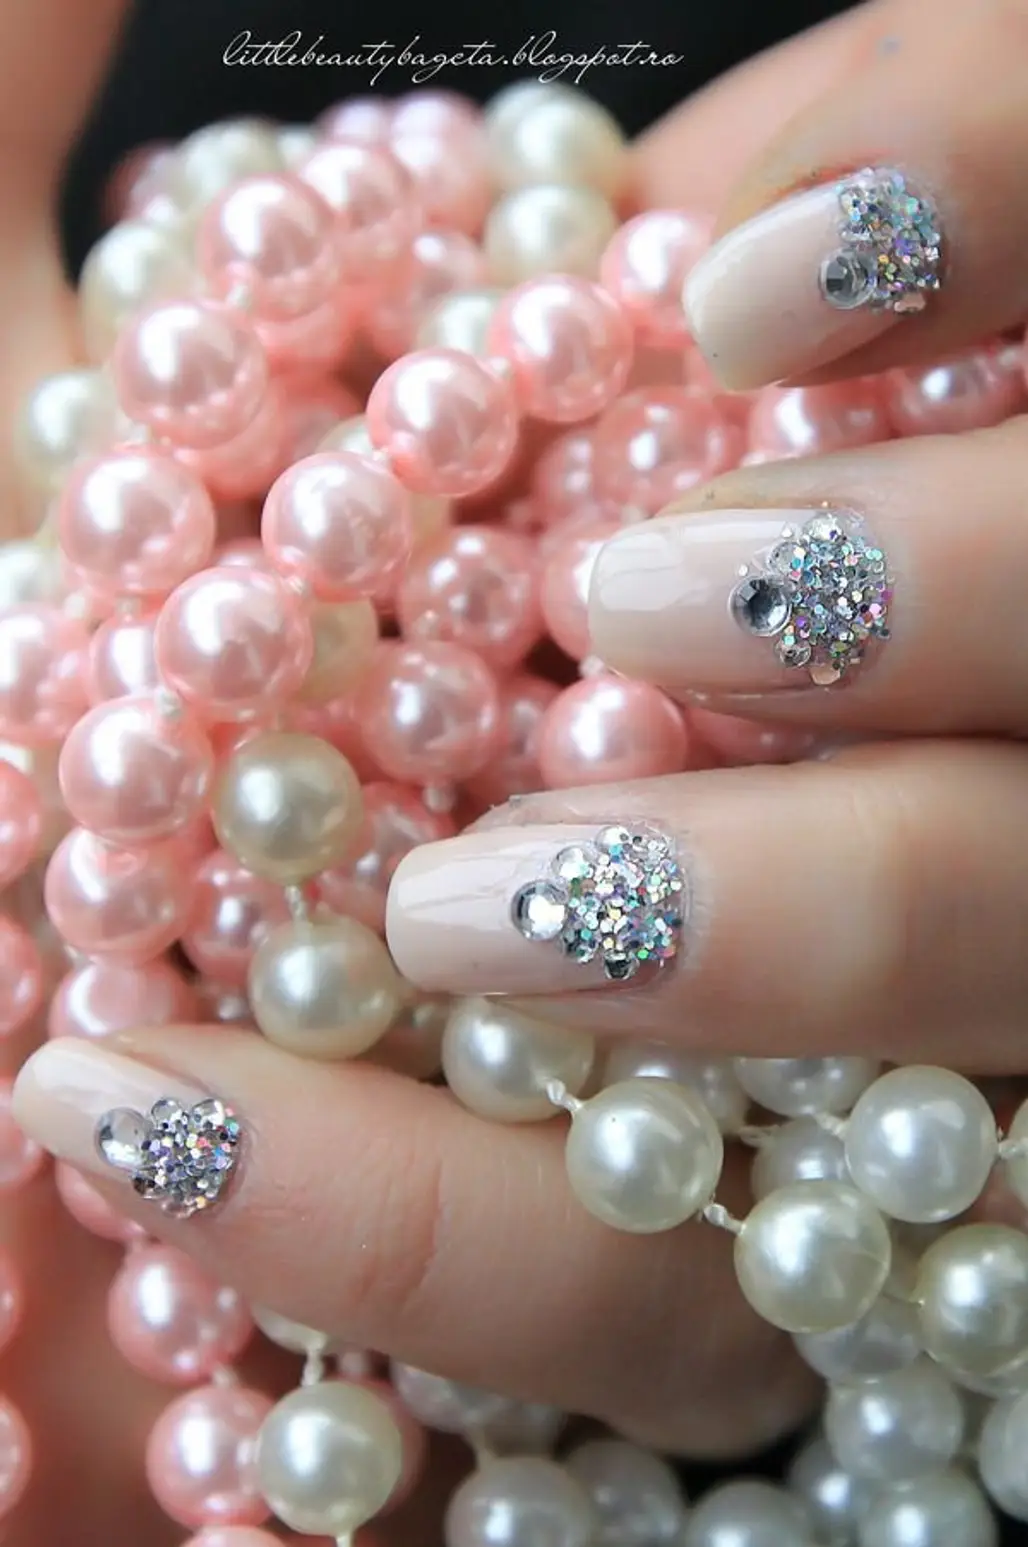 nail,finger,pink,fashion accessory,jewellery,